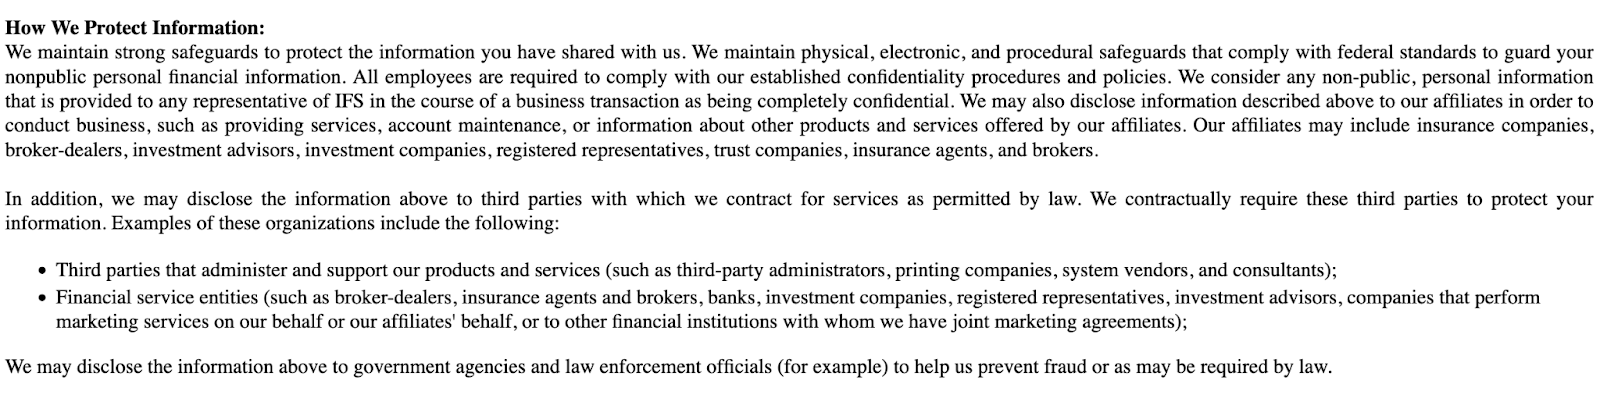 InvestHER Fiduciary privacy policy example